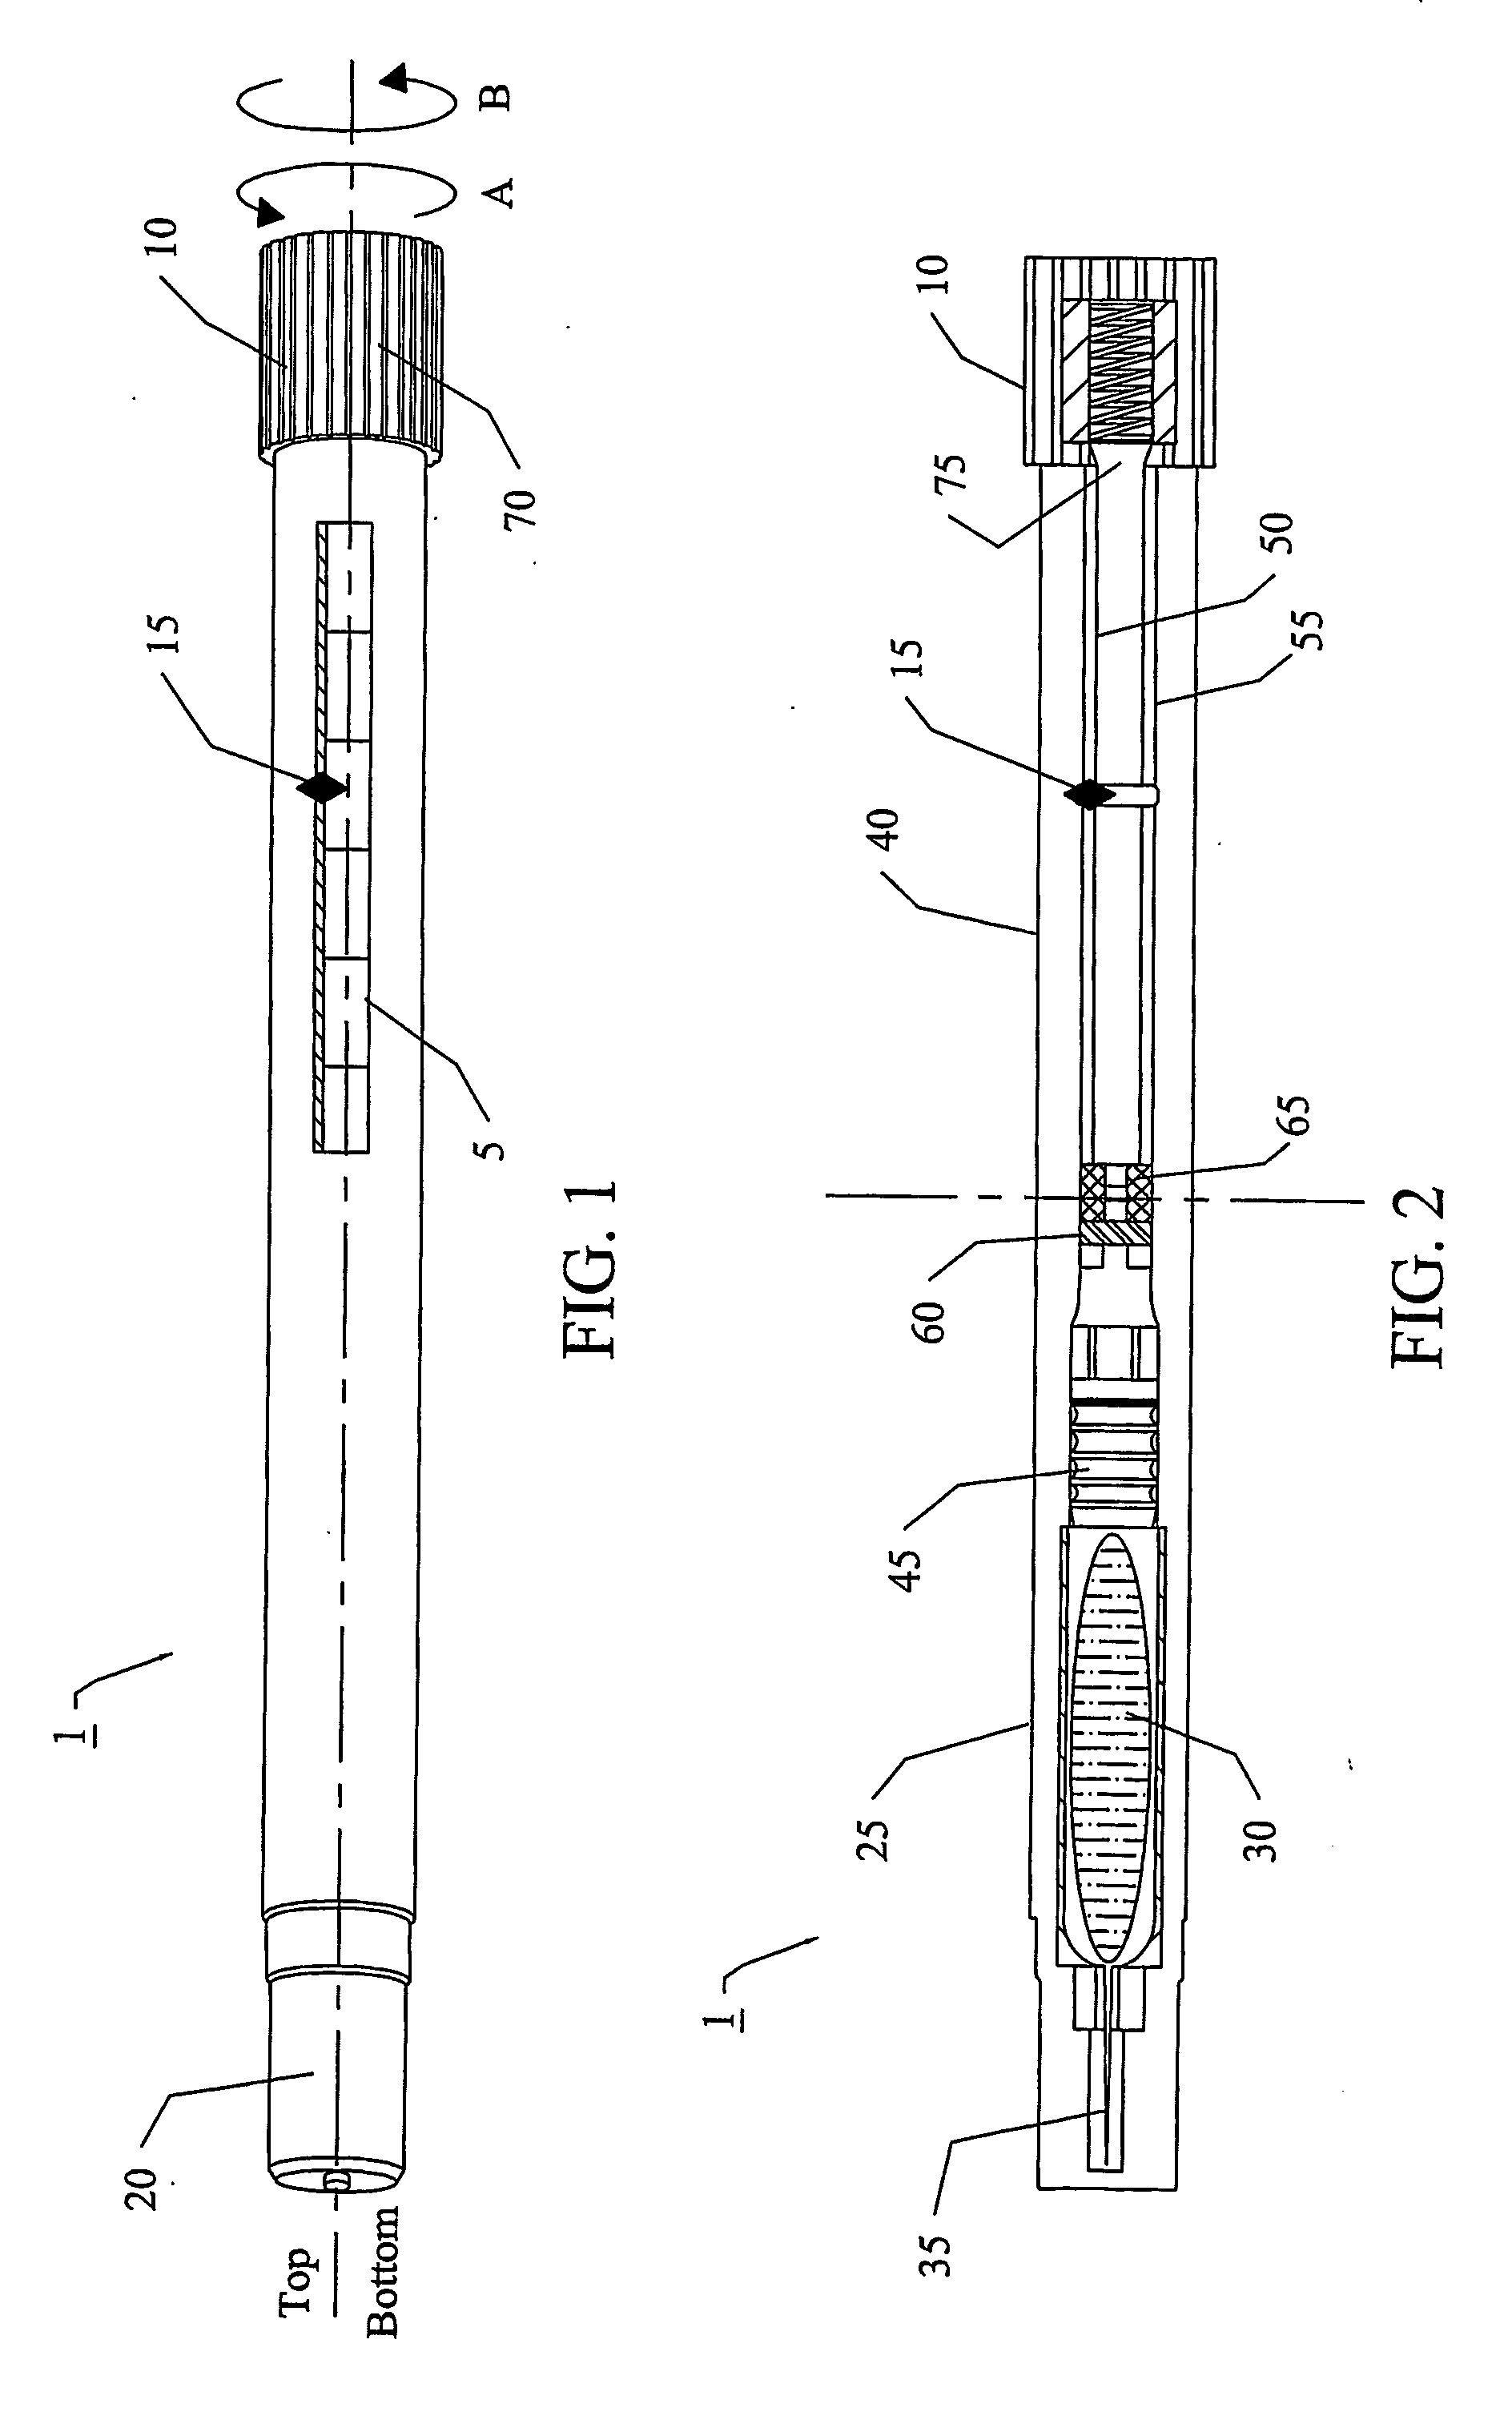 Auto-injection devices and methods for intramuscular administration of medications